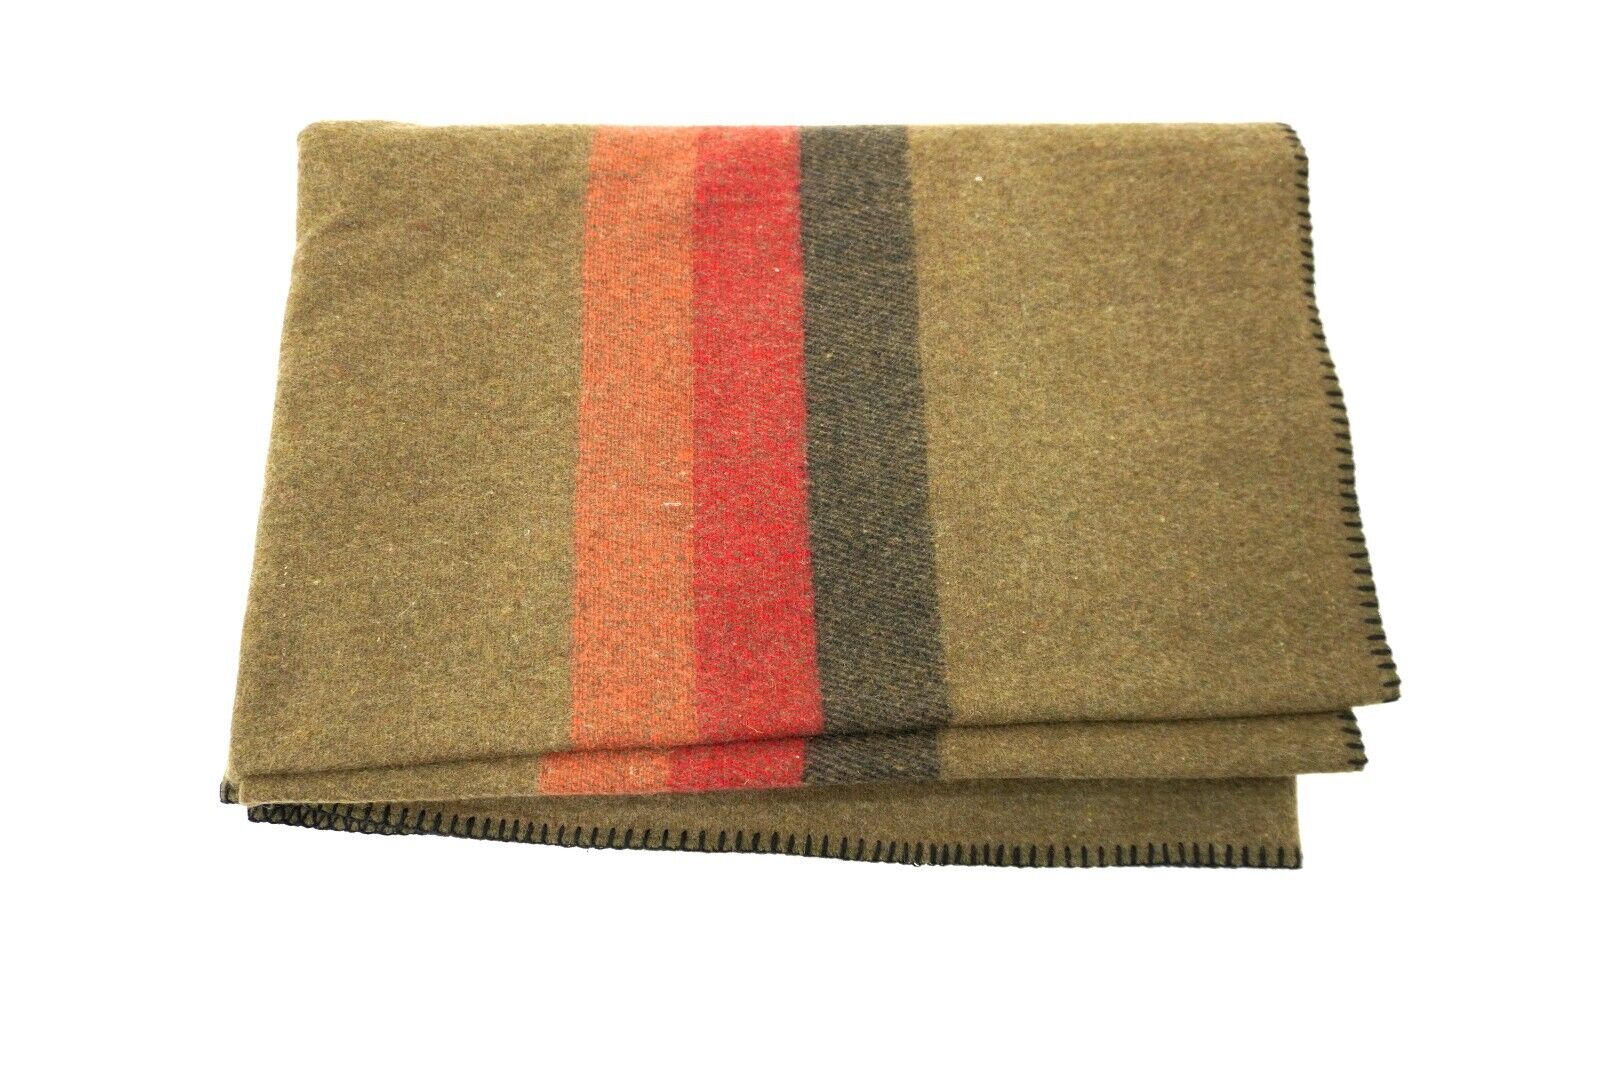 Original German Army Wool Blanket High Quality Thick Surplus Military Issue